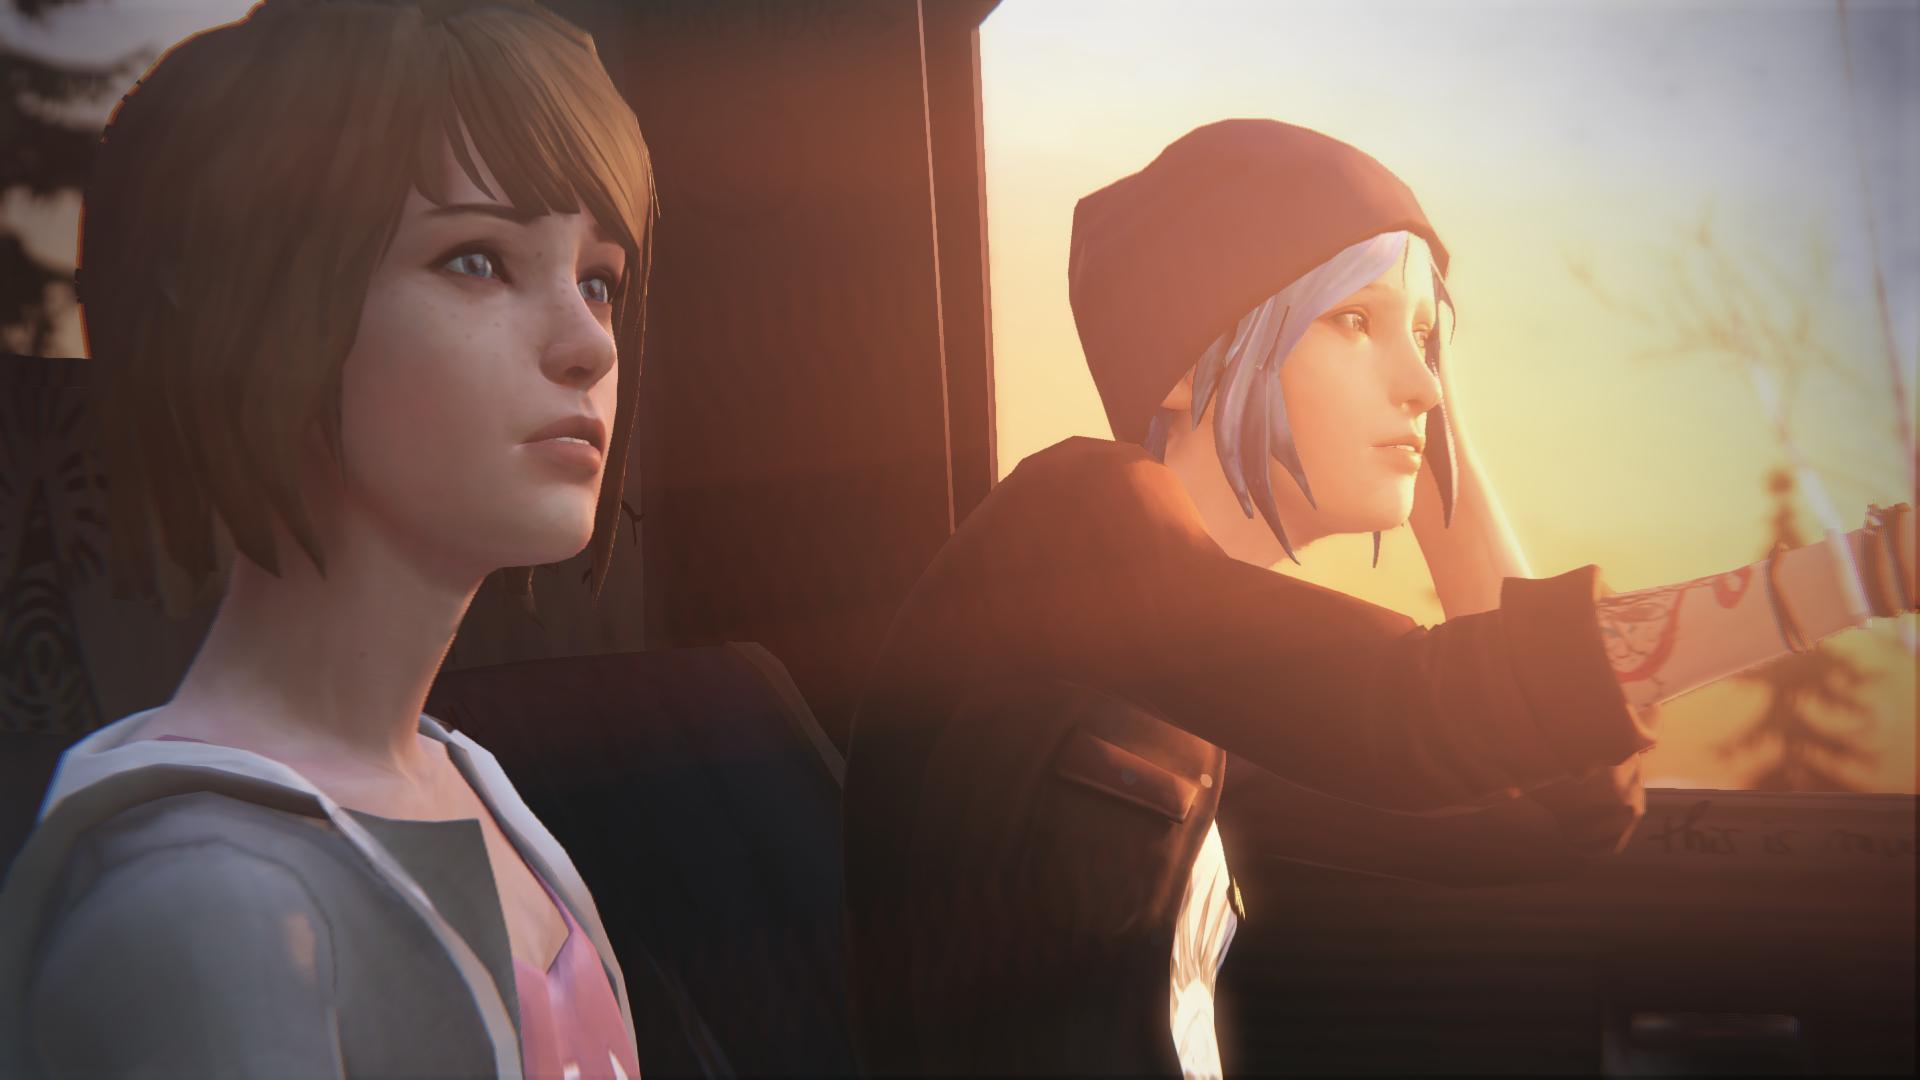 Live-Action TV Series “Life Is Strange” Coming - Decisions Probably Won't Matter All That Much